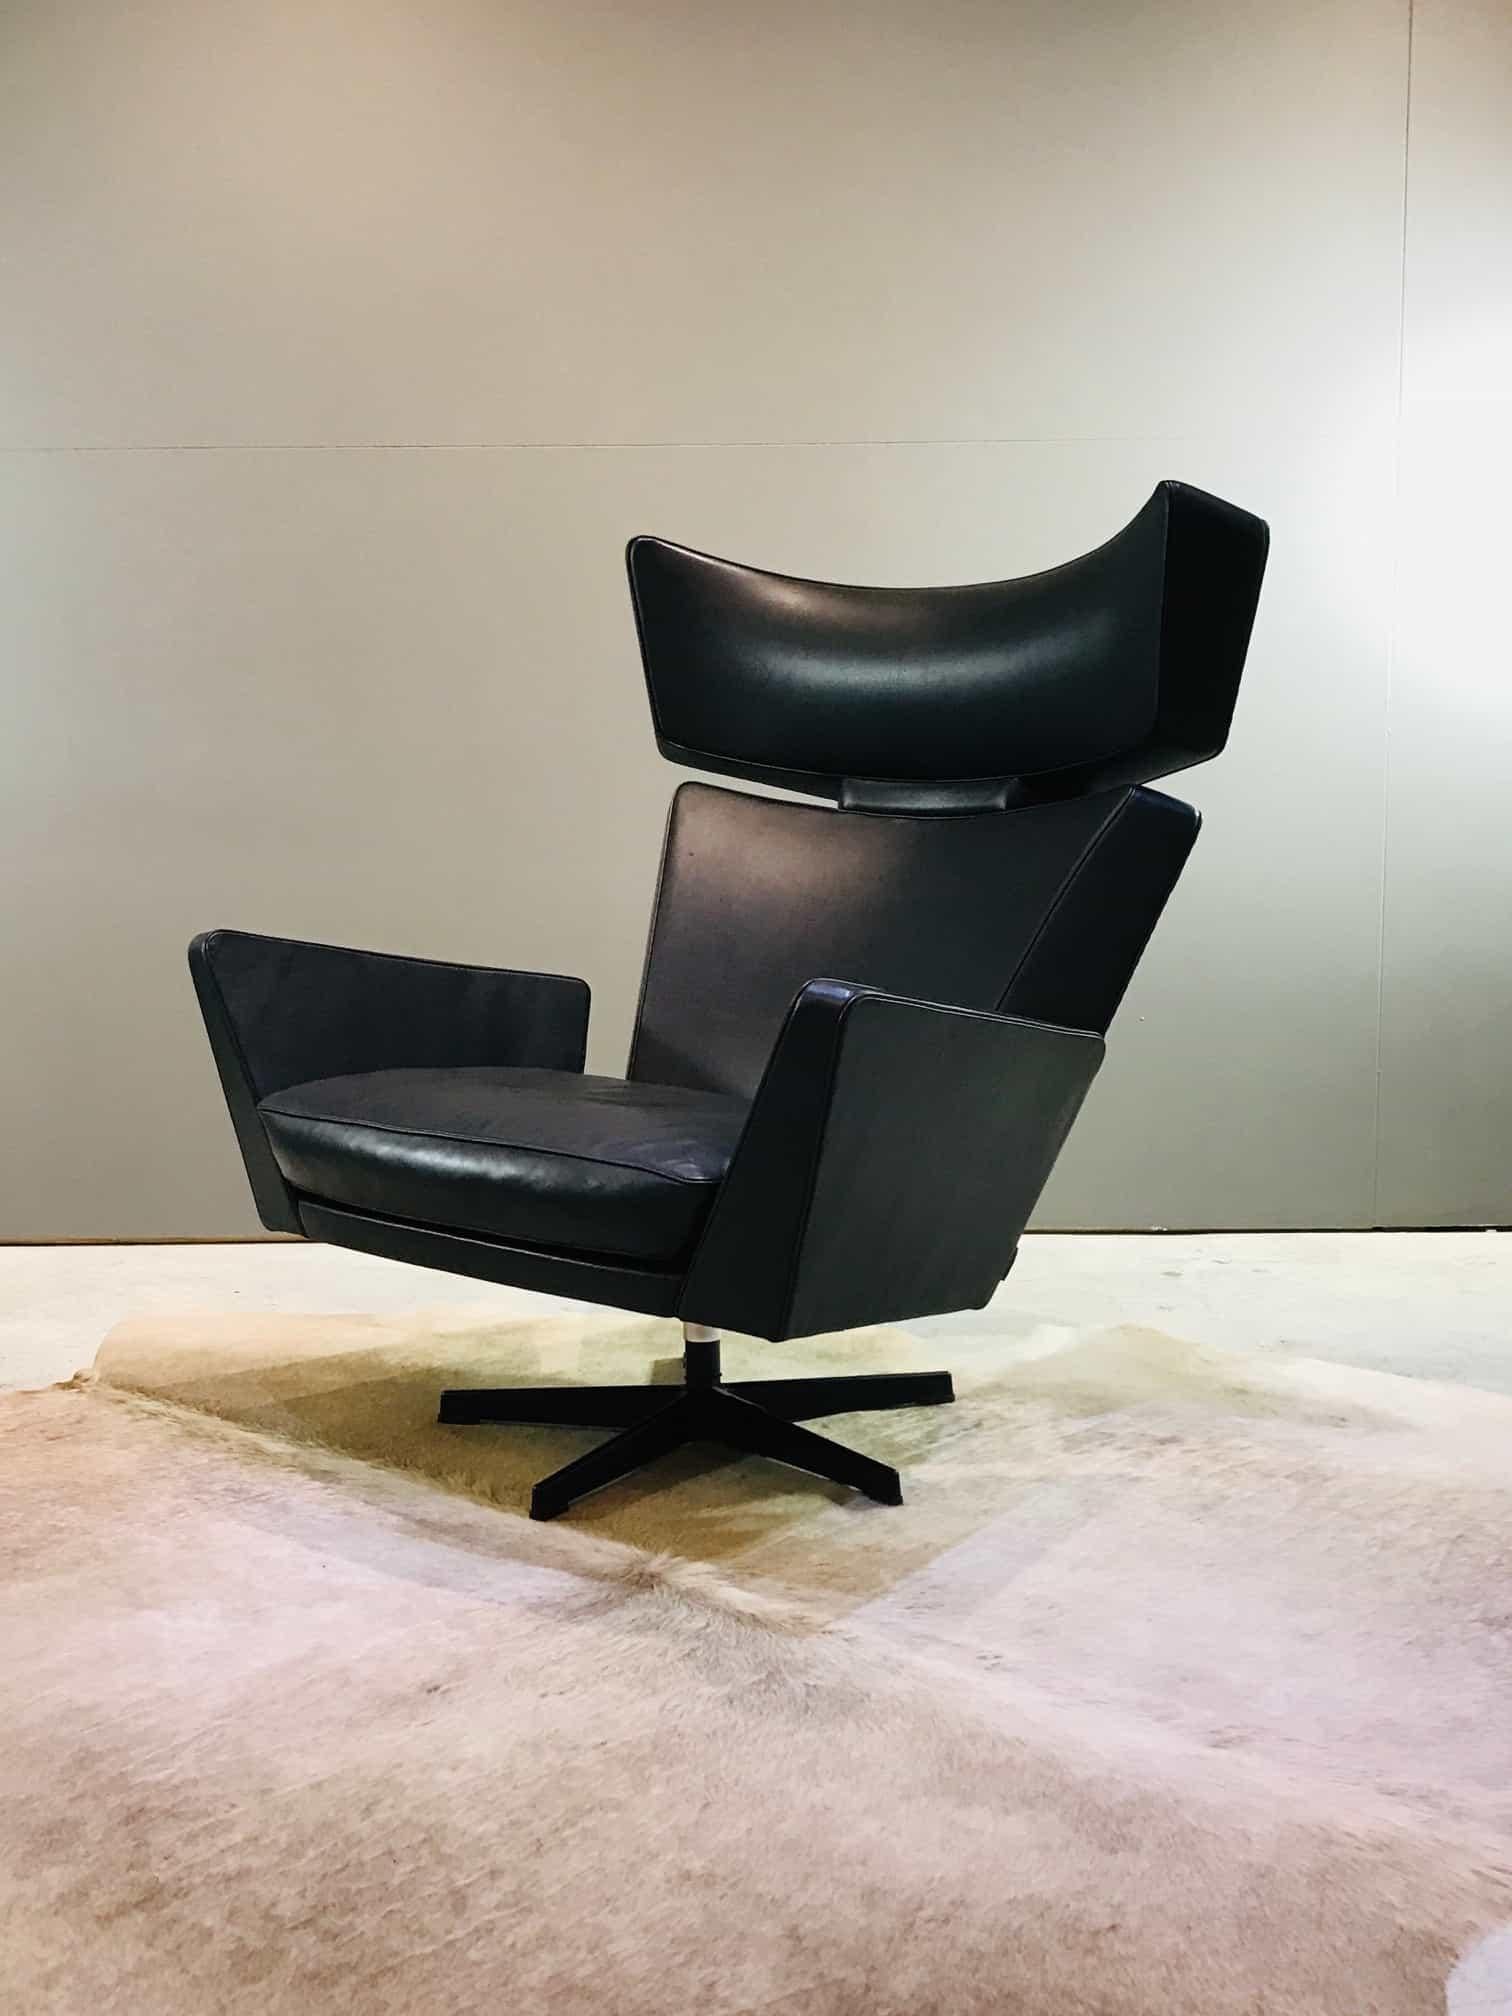 Contemporary Midcentury Black Leather Lounge Chair by Arne Jacobsen Oksen, Ox Chair For Sale